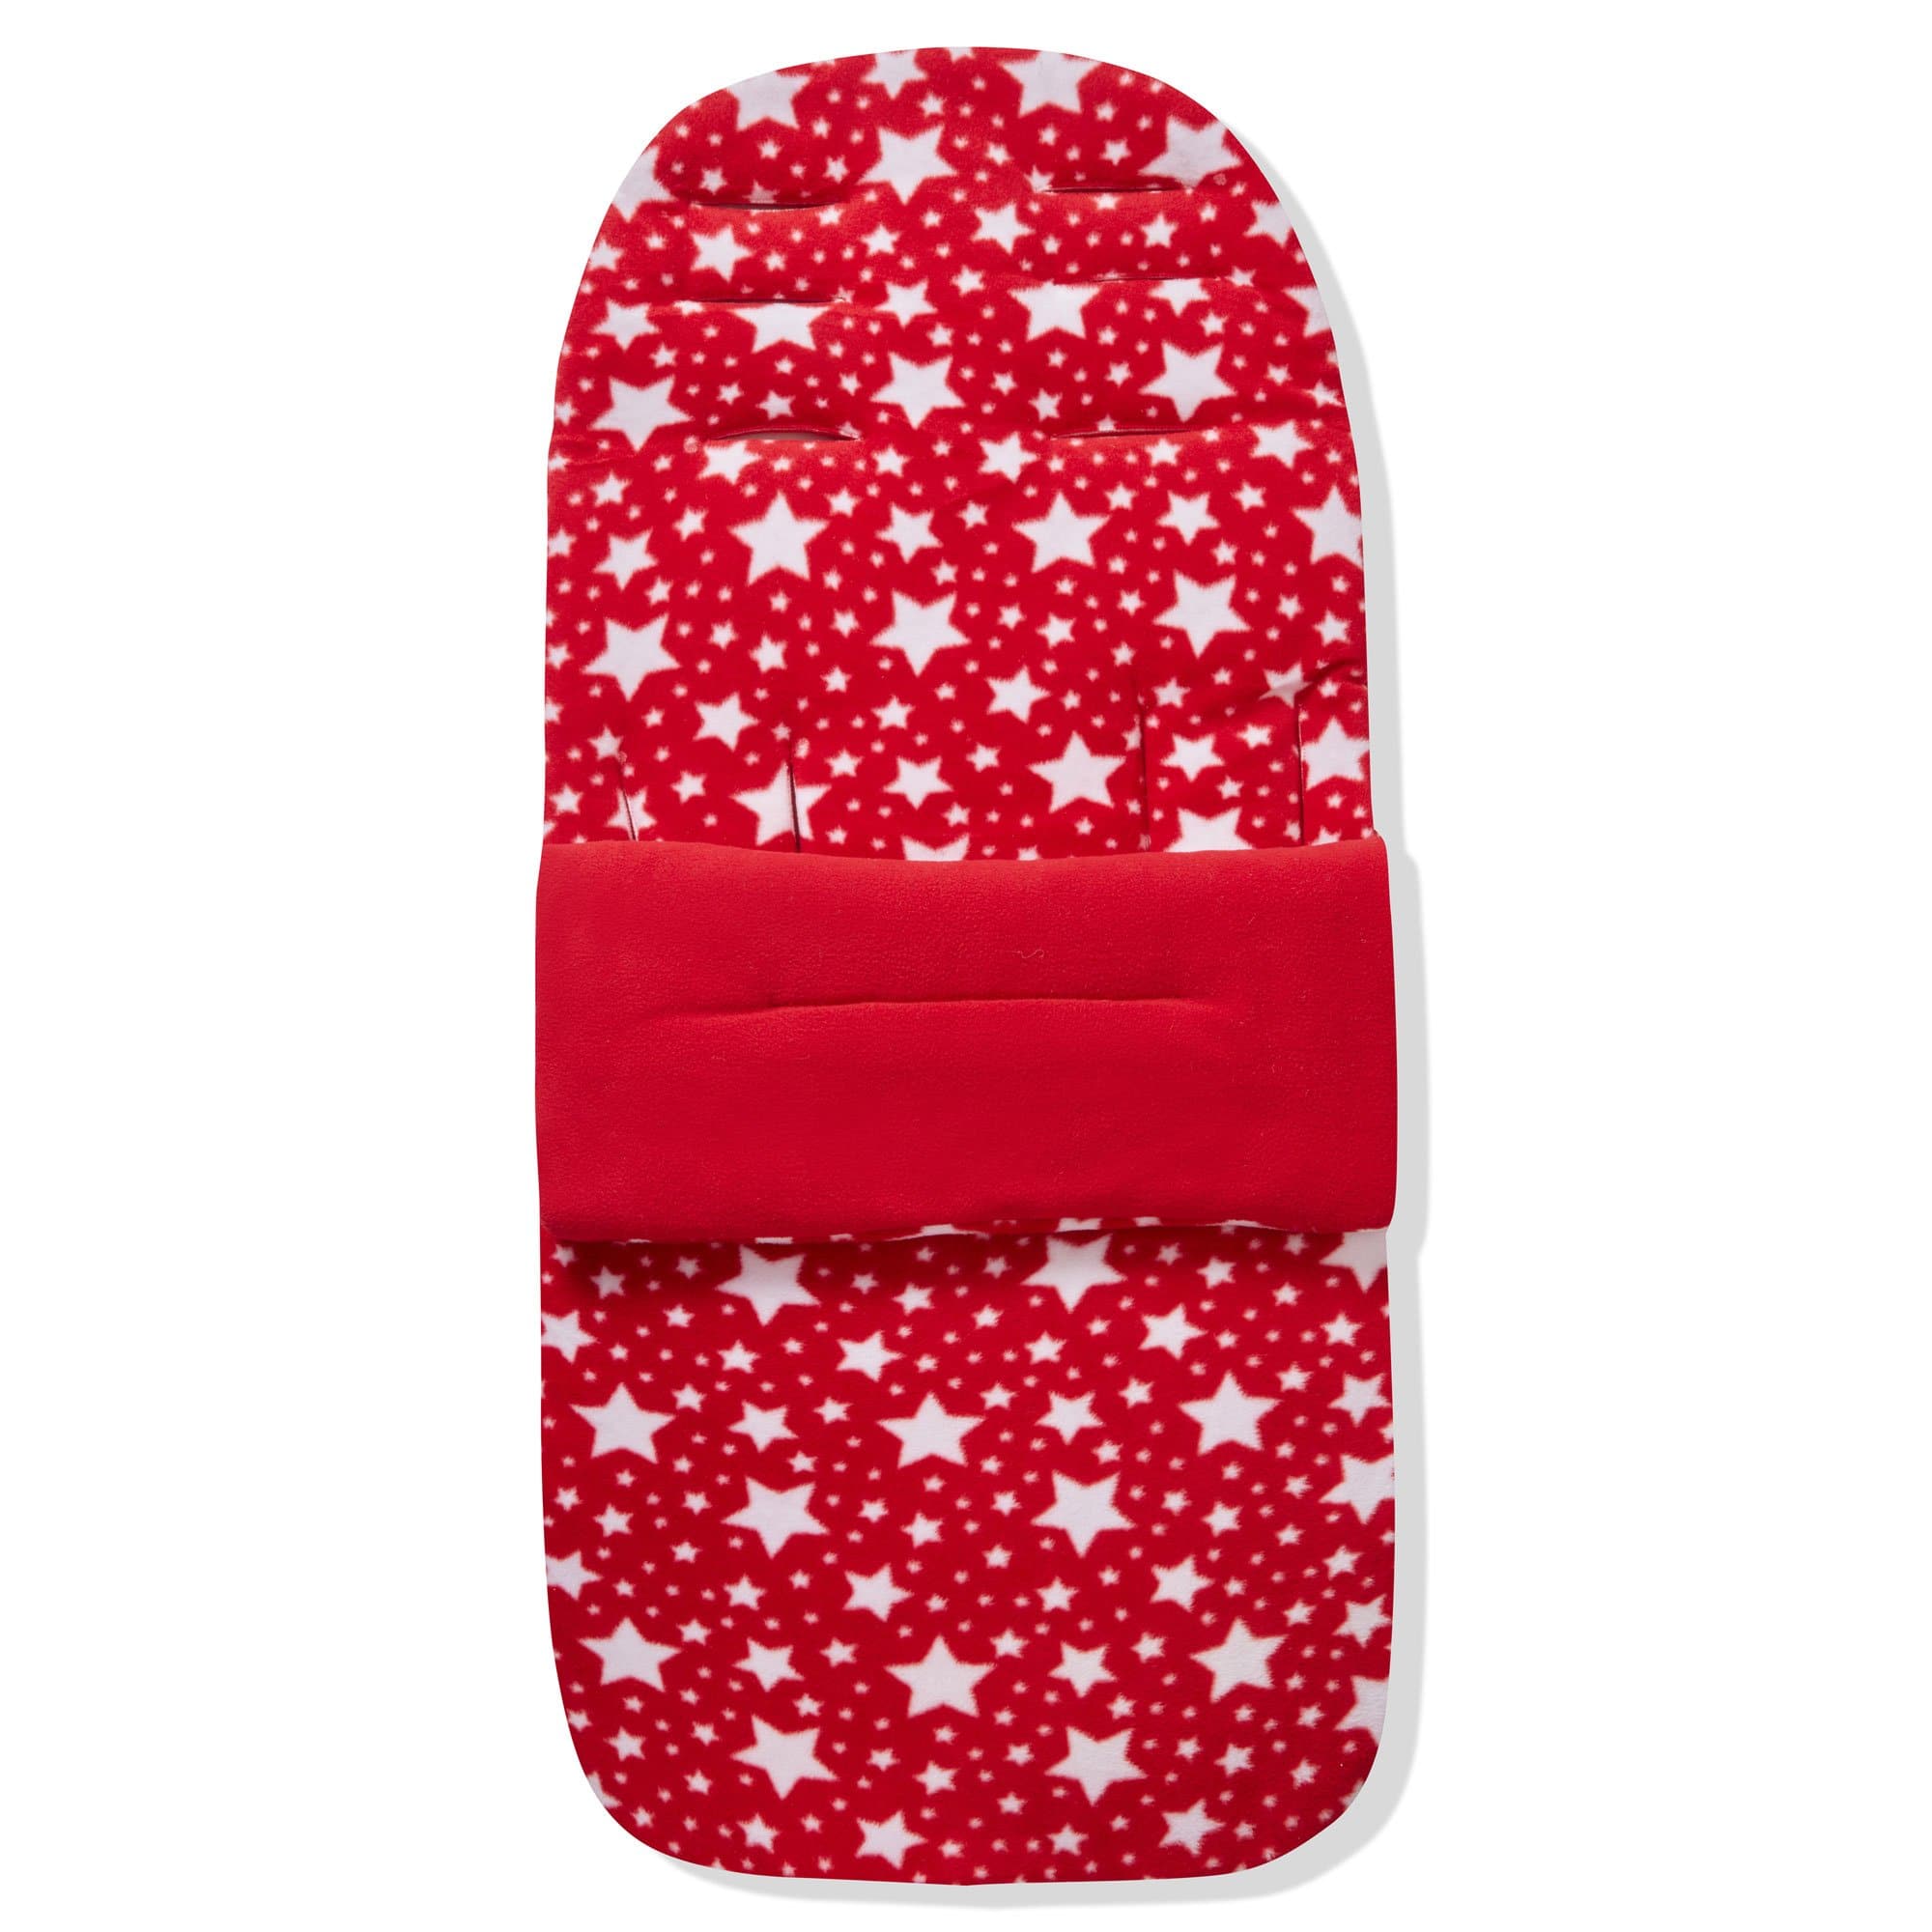 Fleece Footmuff / Cosy Toes Compatible with Babybus - For Your Little One